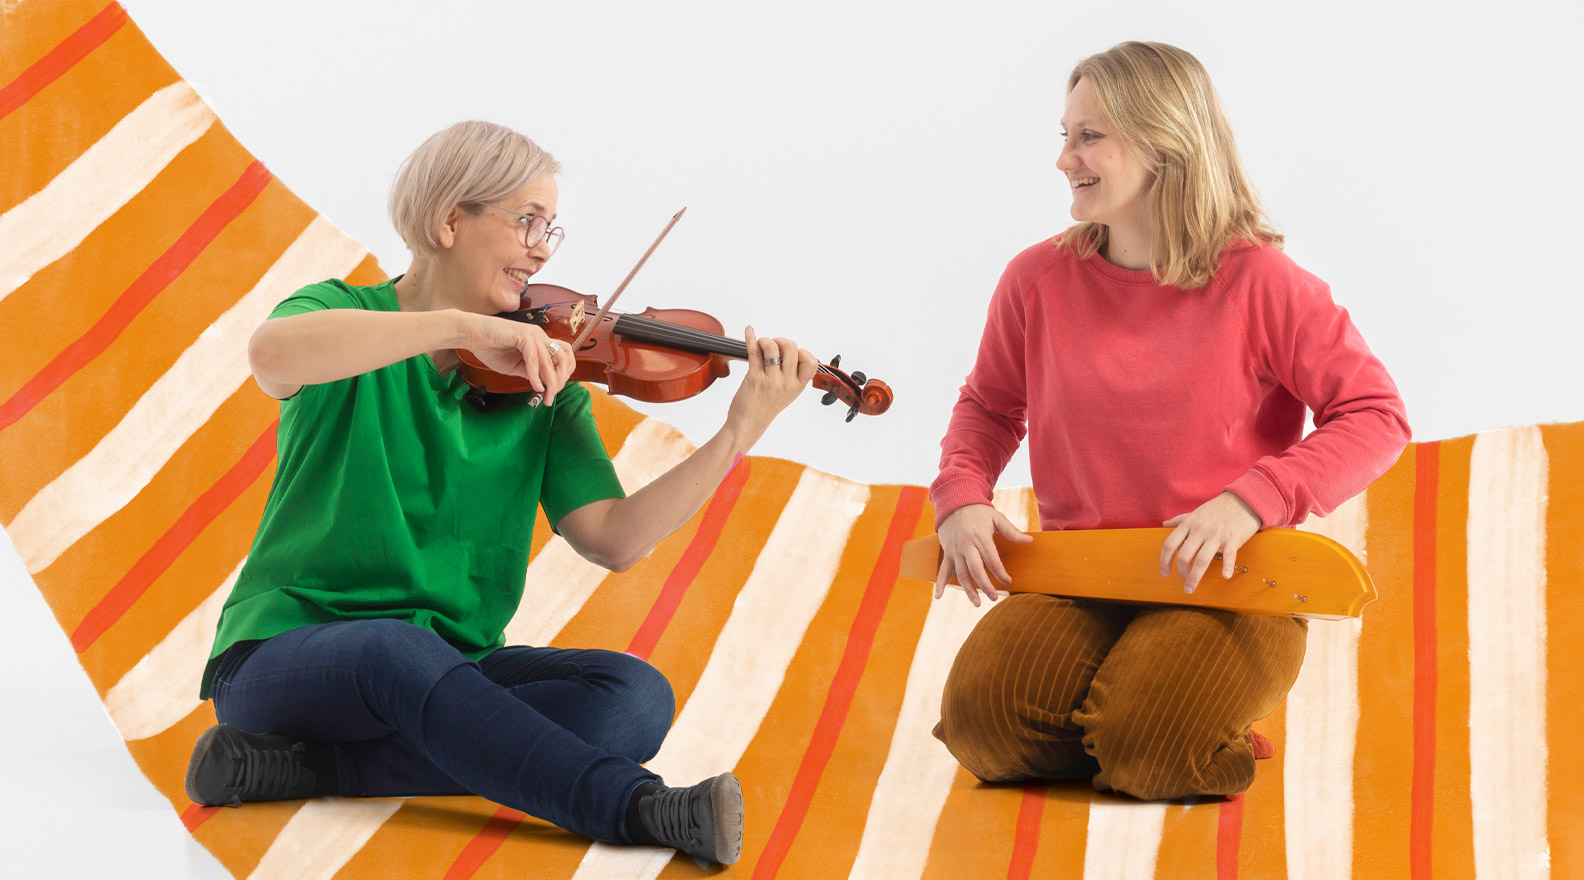 Two women sit on the floor. One of the women plays the violin, the other the kantele. A drawn rug has been added to the picture.